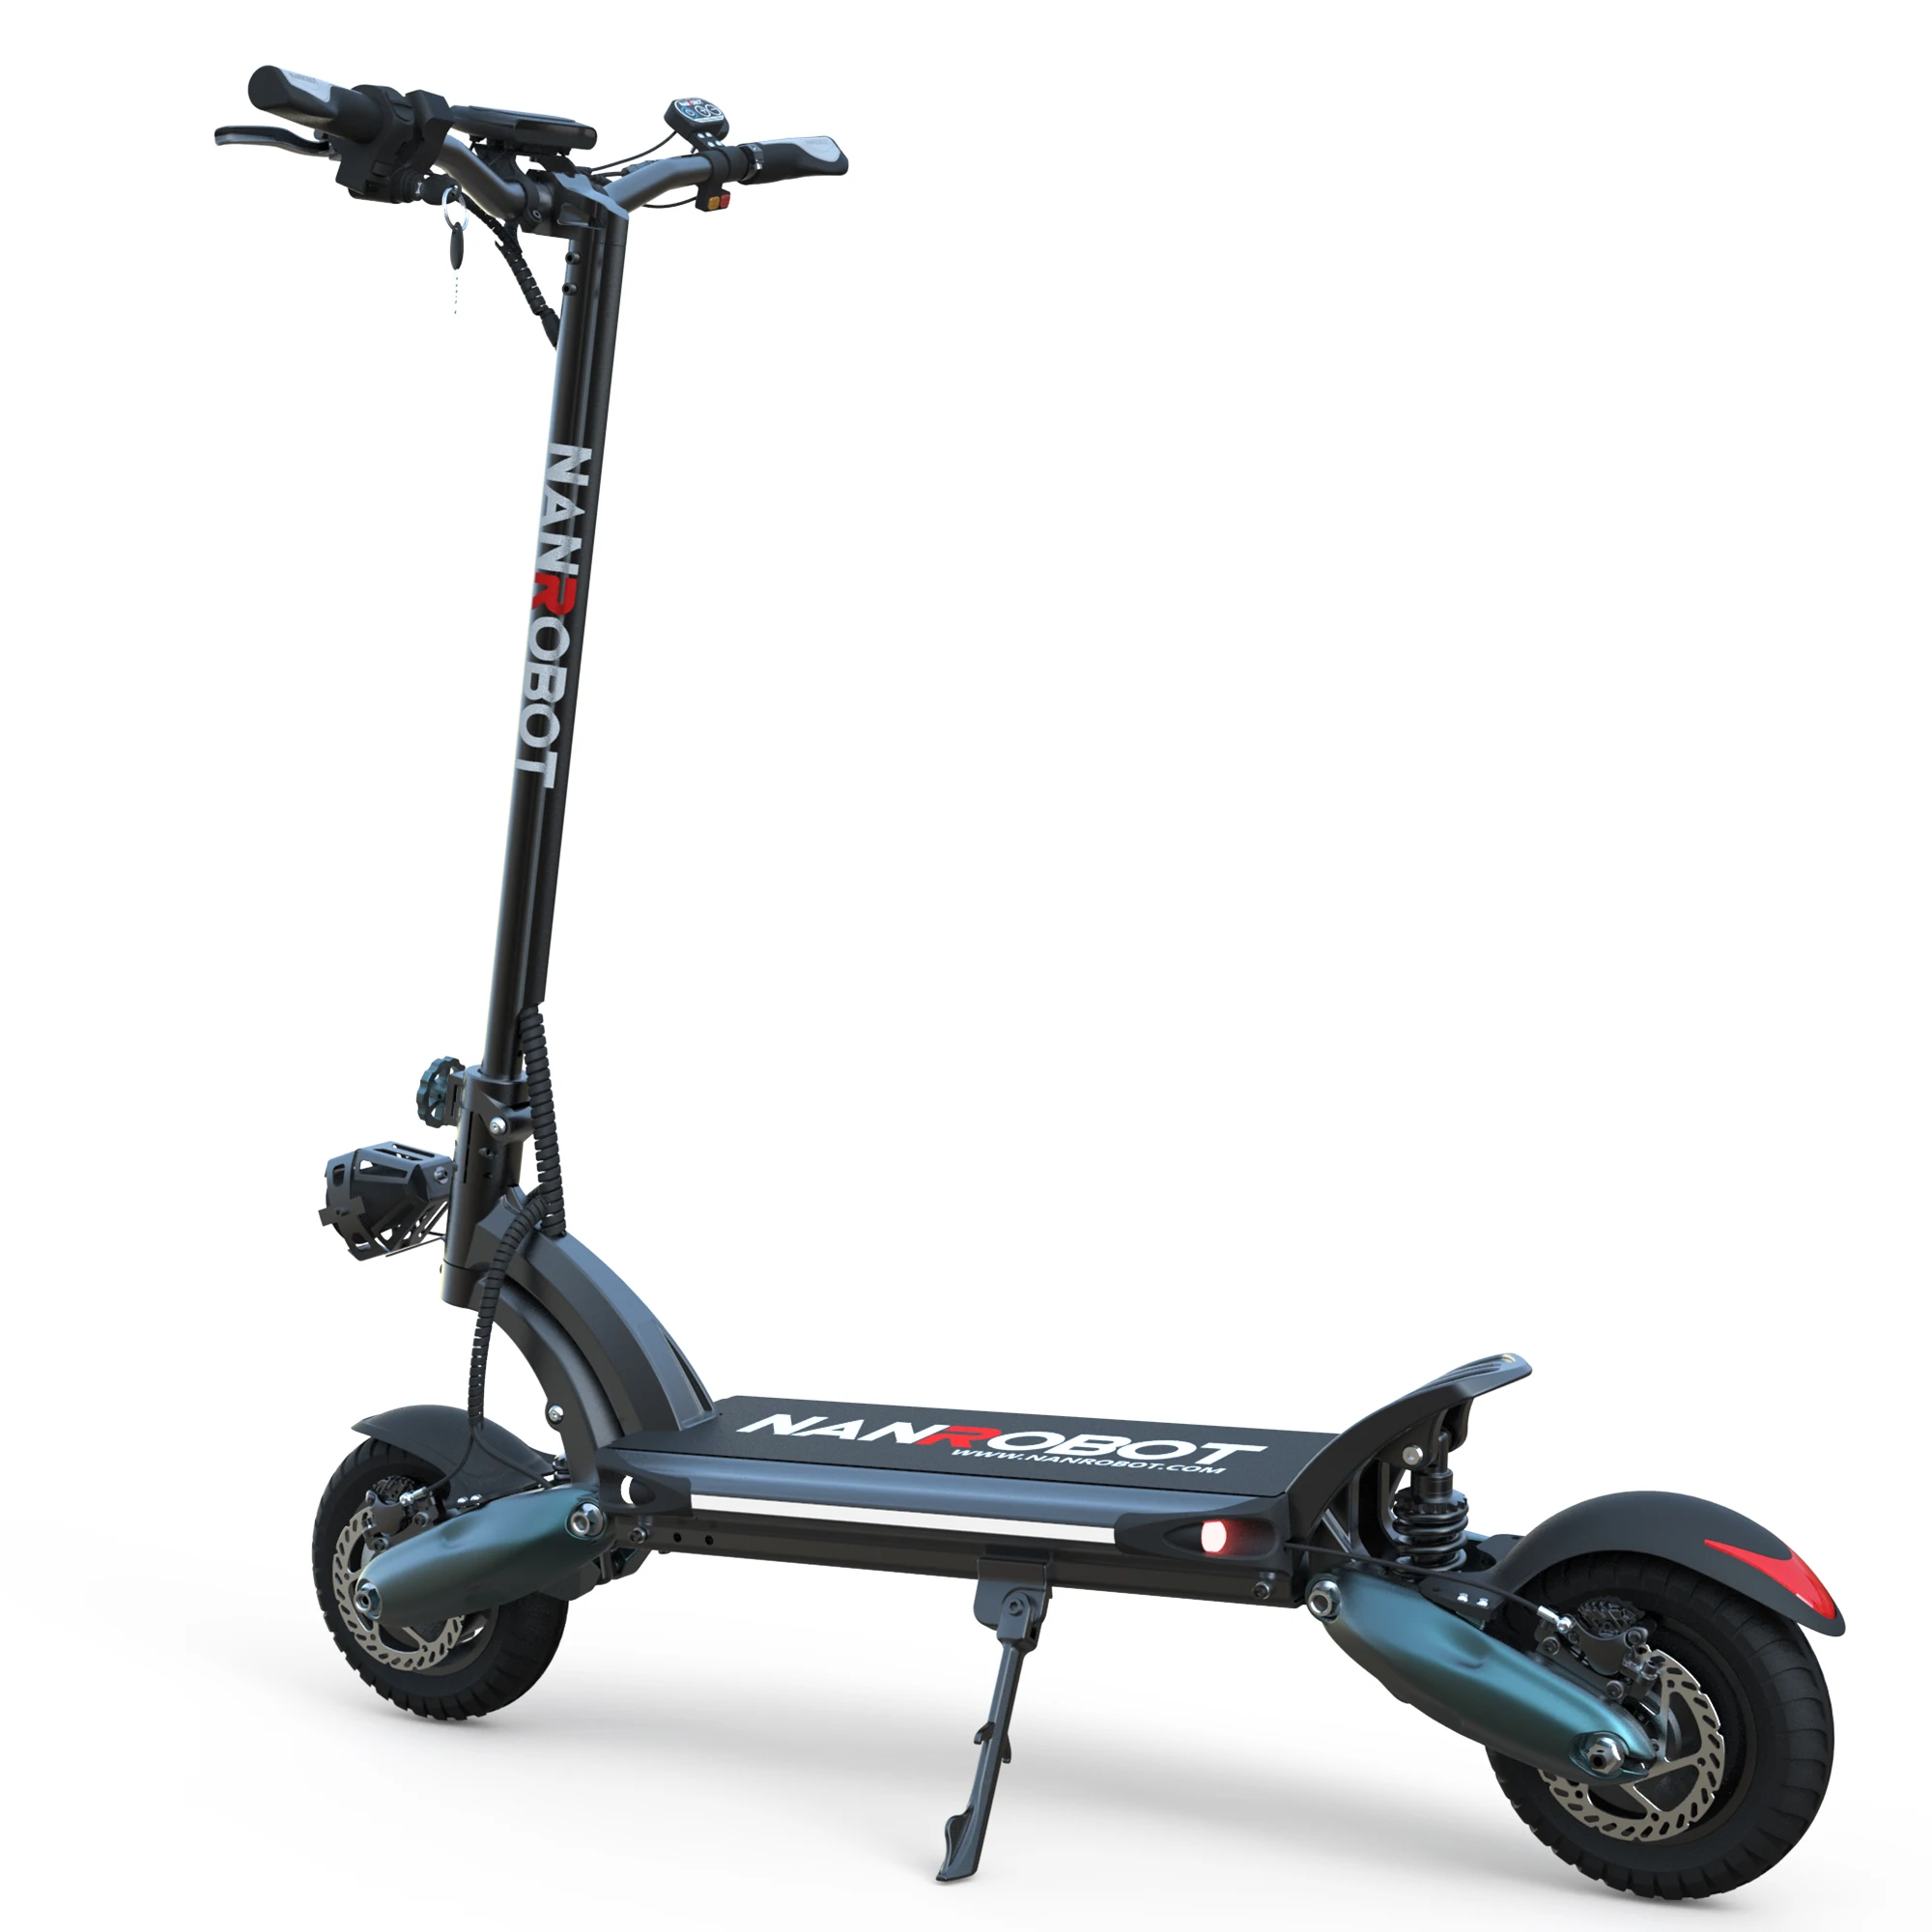 Nanrobot electric scooter D6+ adult scooter Off-road Tyre fastest Dual Motors 2000W Disc Brake for adultscustom